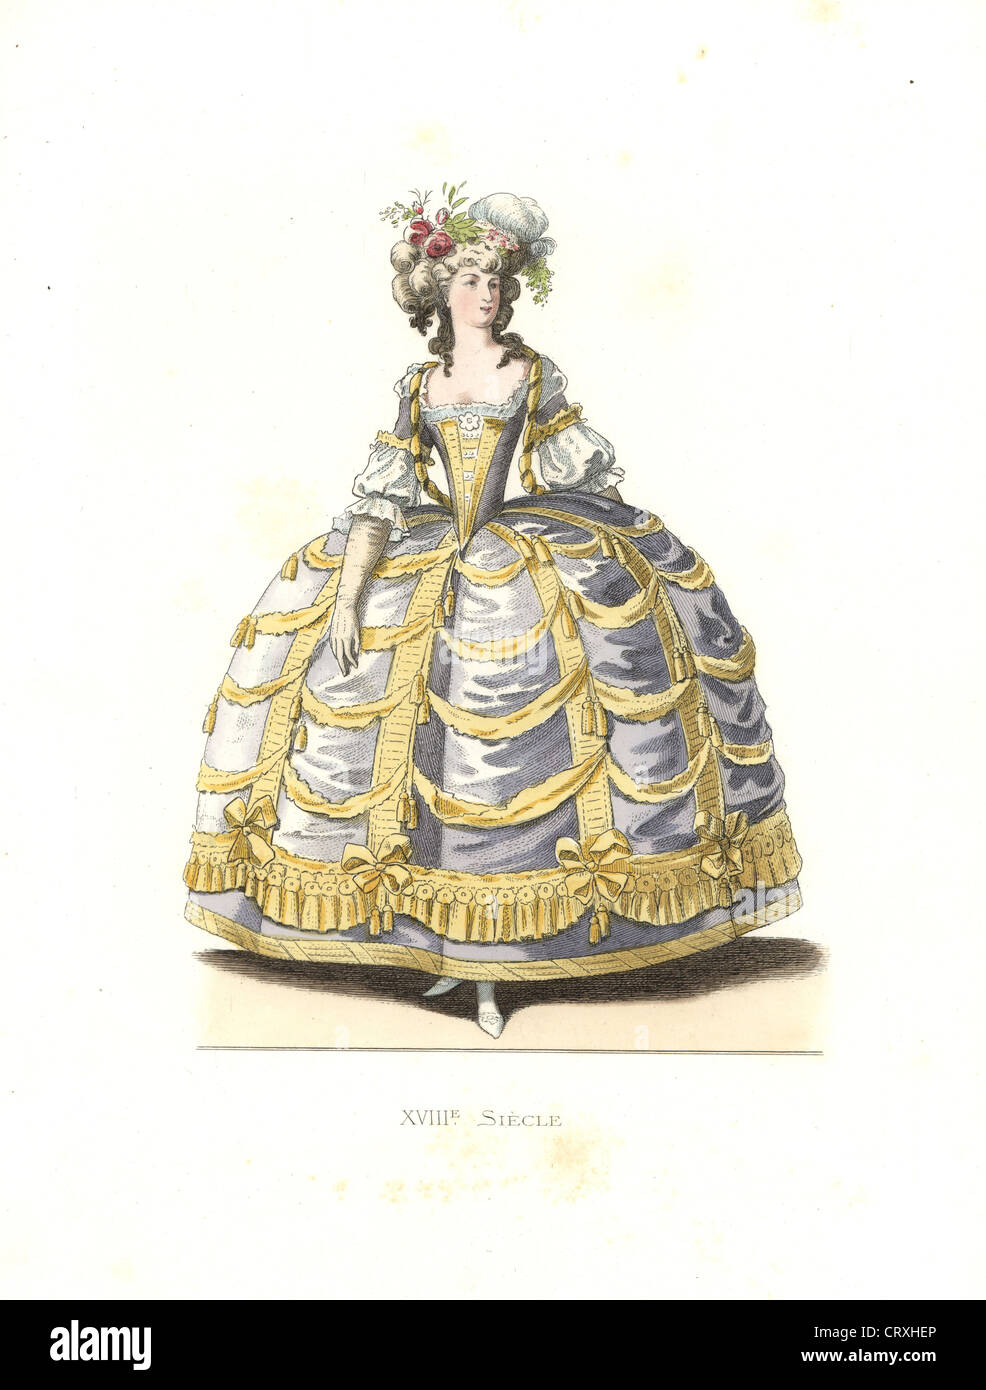 Woman in ball gown, France, 18th century. Stock Photo